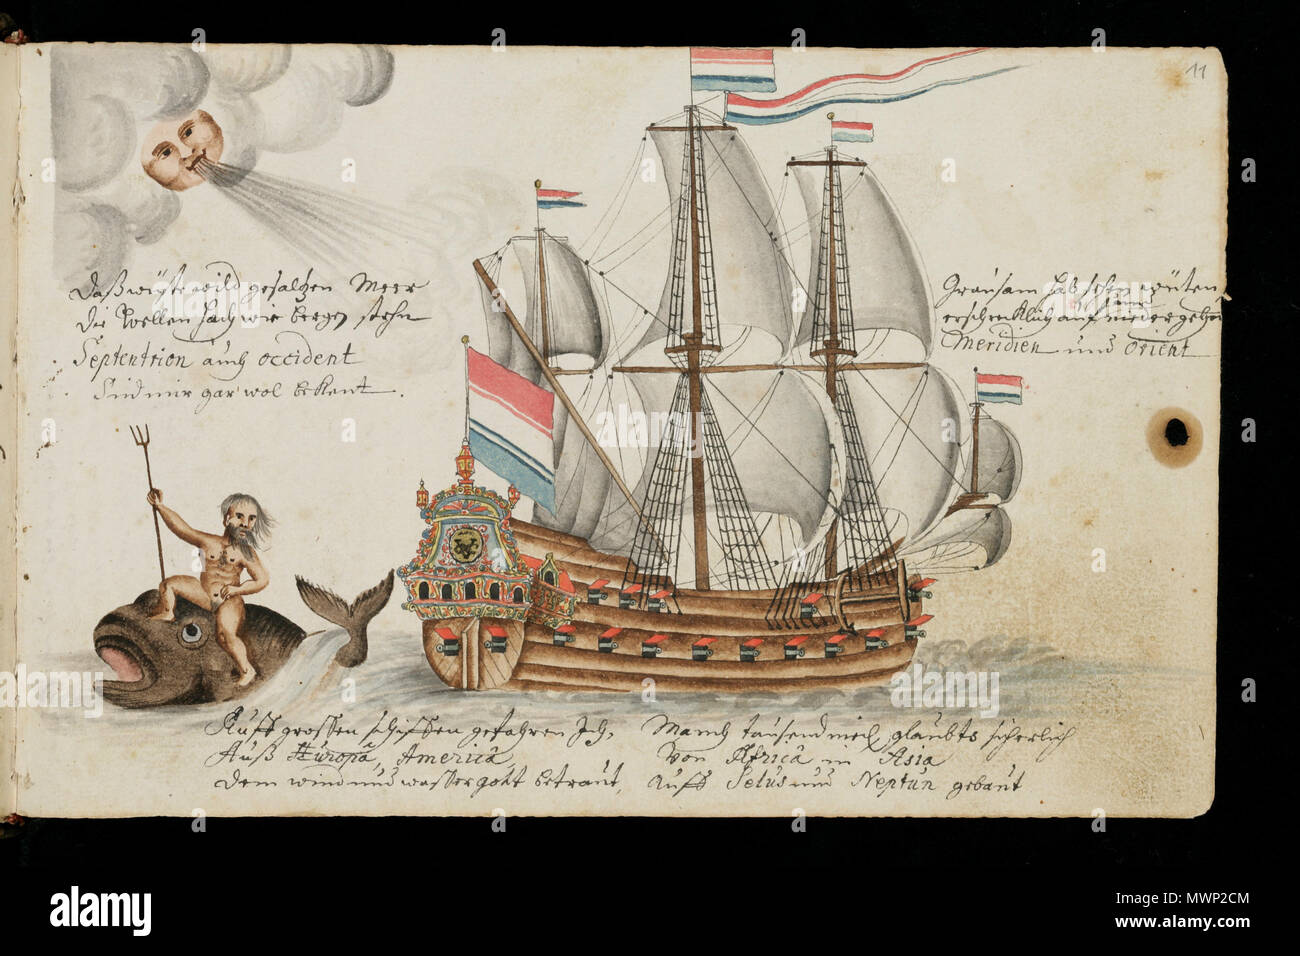 . An illustration of the ship Gouda, from 'Reise nach Batavia', an illustrated manuscript by Georg Franz Müller, describing his voyage to South Africa and Indonesia and his stay there (1669-1682) in services of the Dutch East India Company. . Georg Franz Müller (1646-1723) 513 RBSeite11 Stock Photo